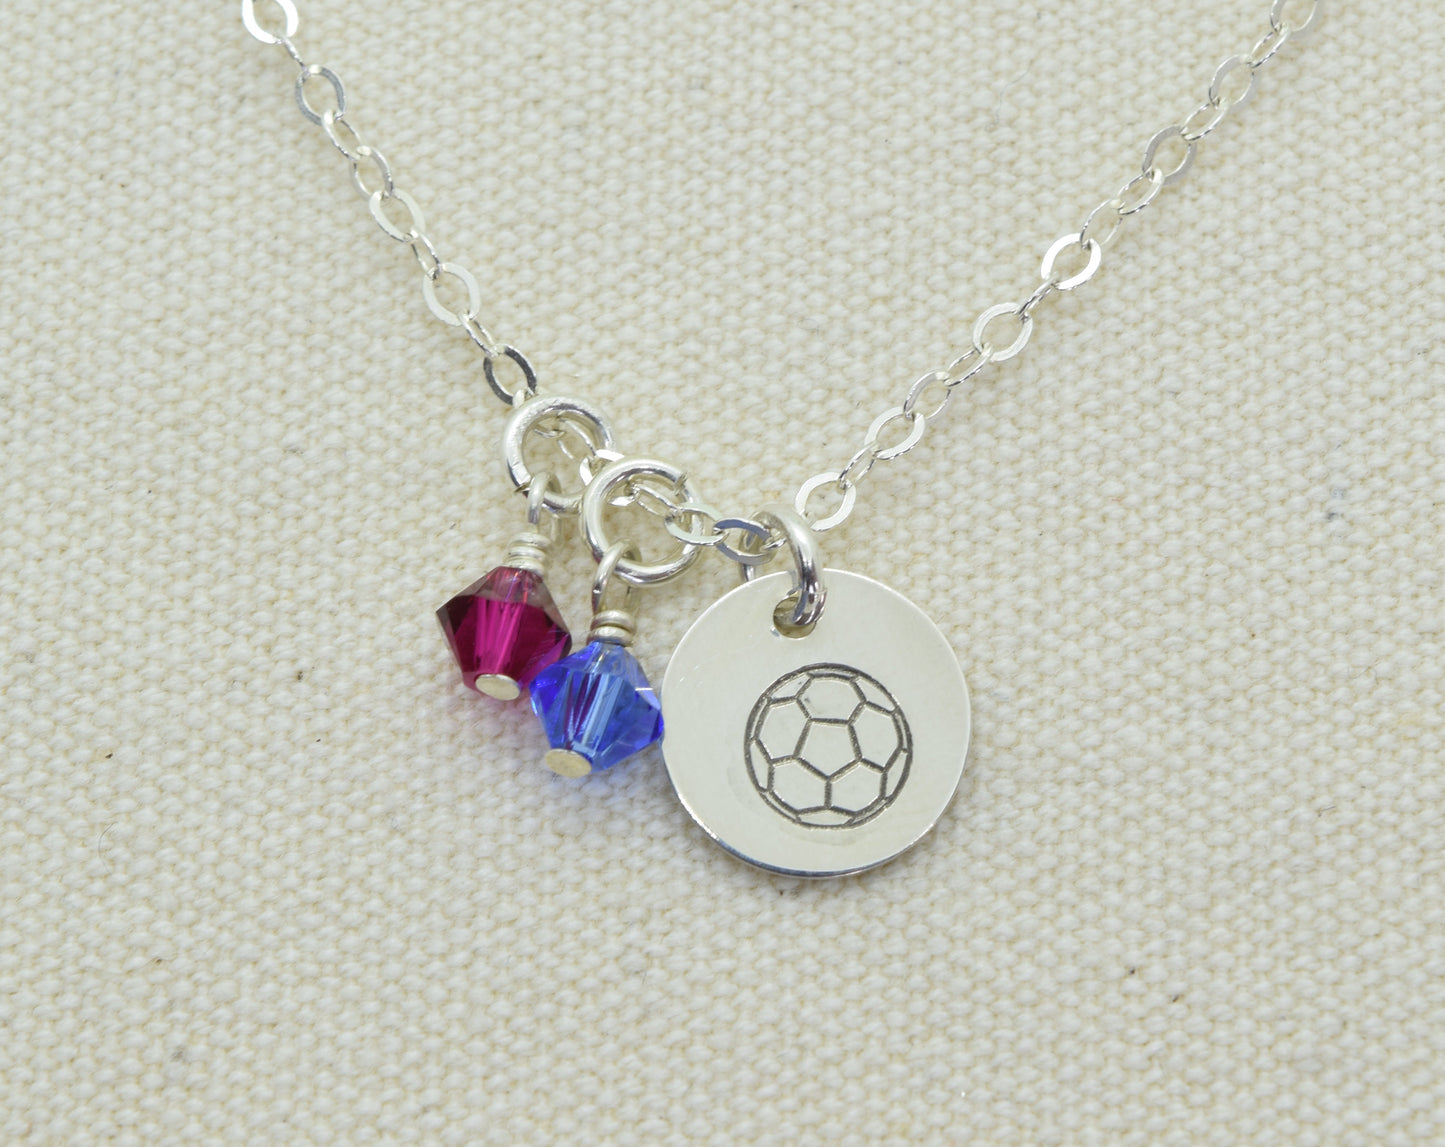 Silver Soccer Ball Charm Necklace